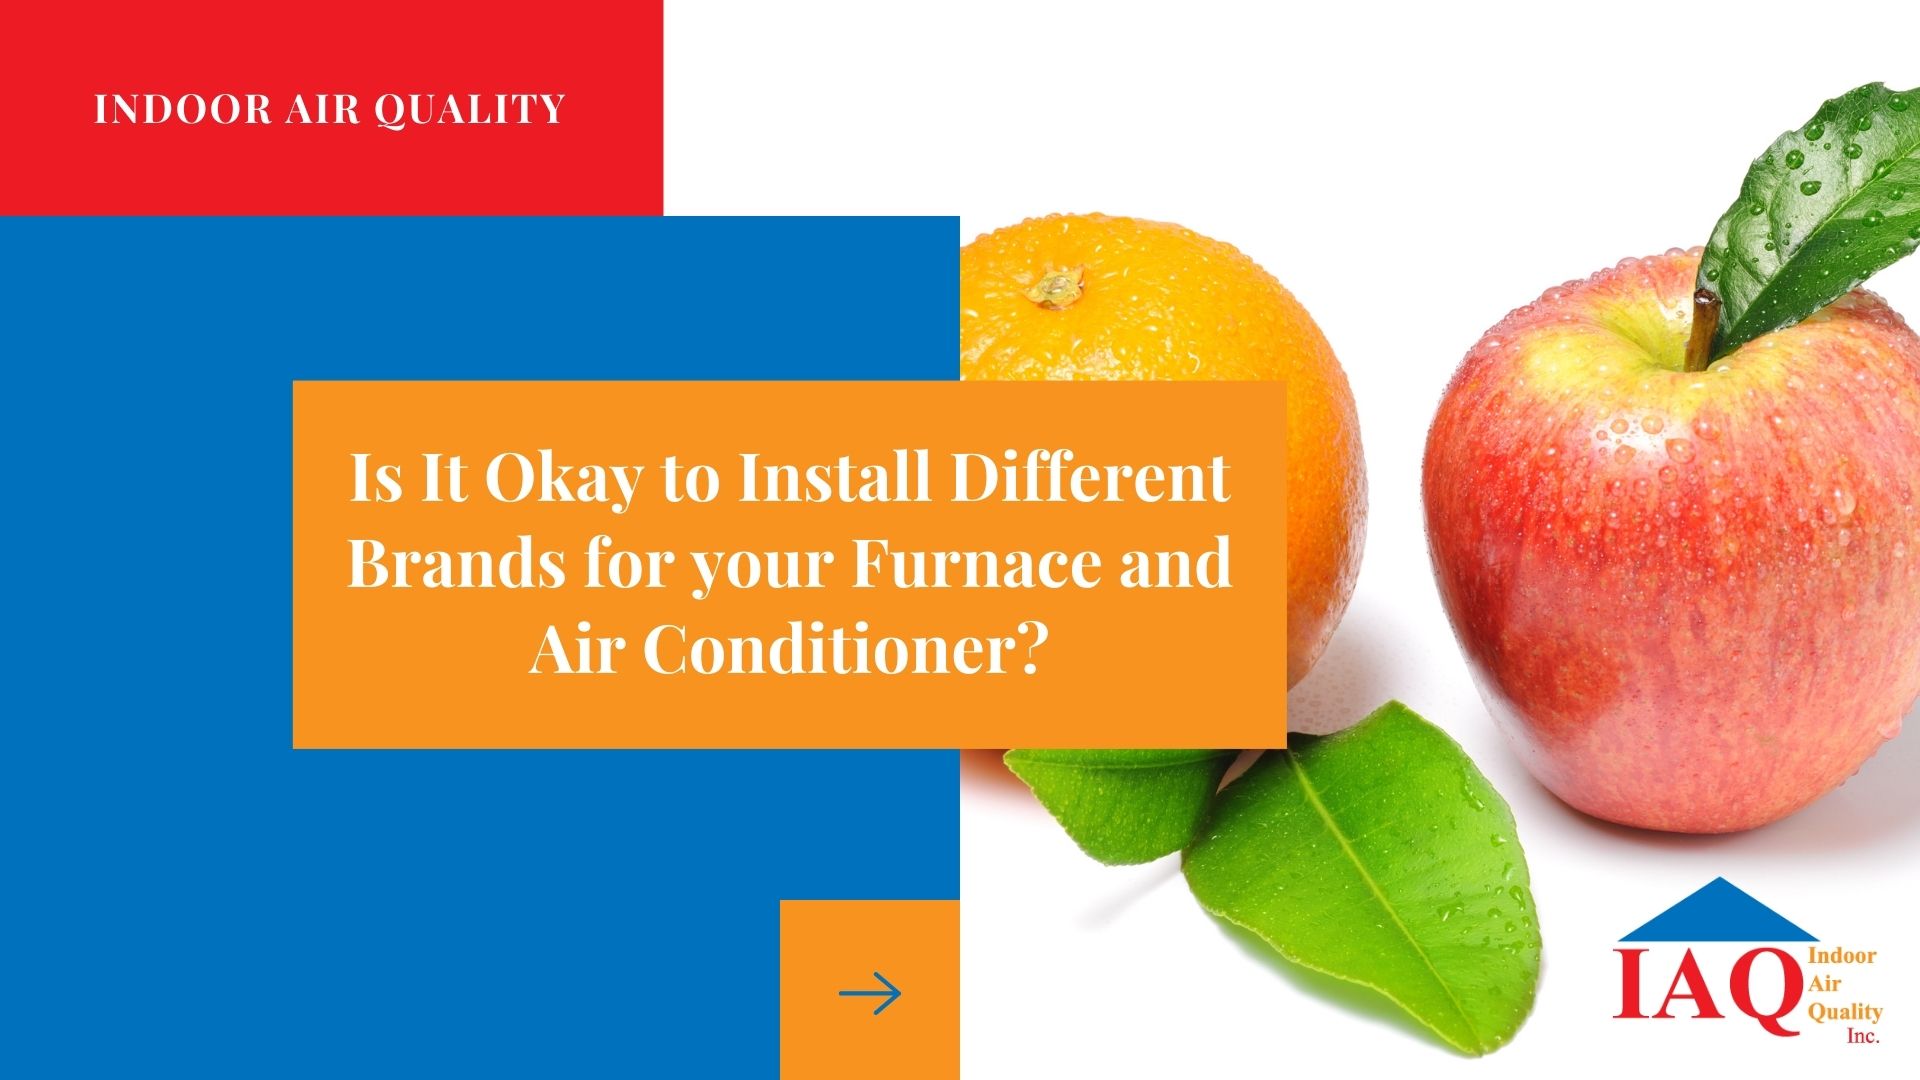 Is It Okay to Install Different Brands for your Furnace and Air Conditioner?